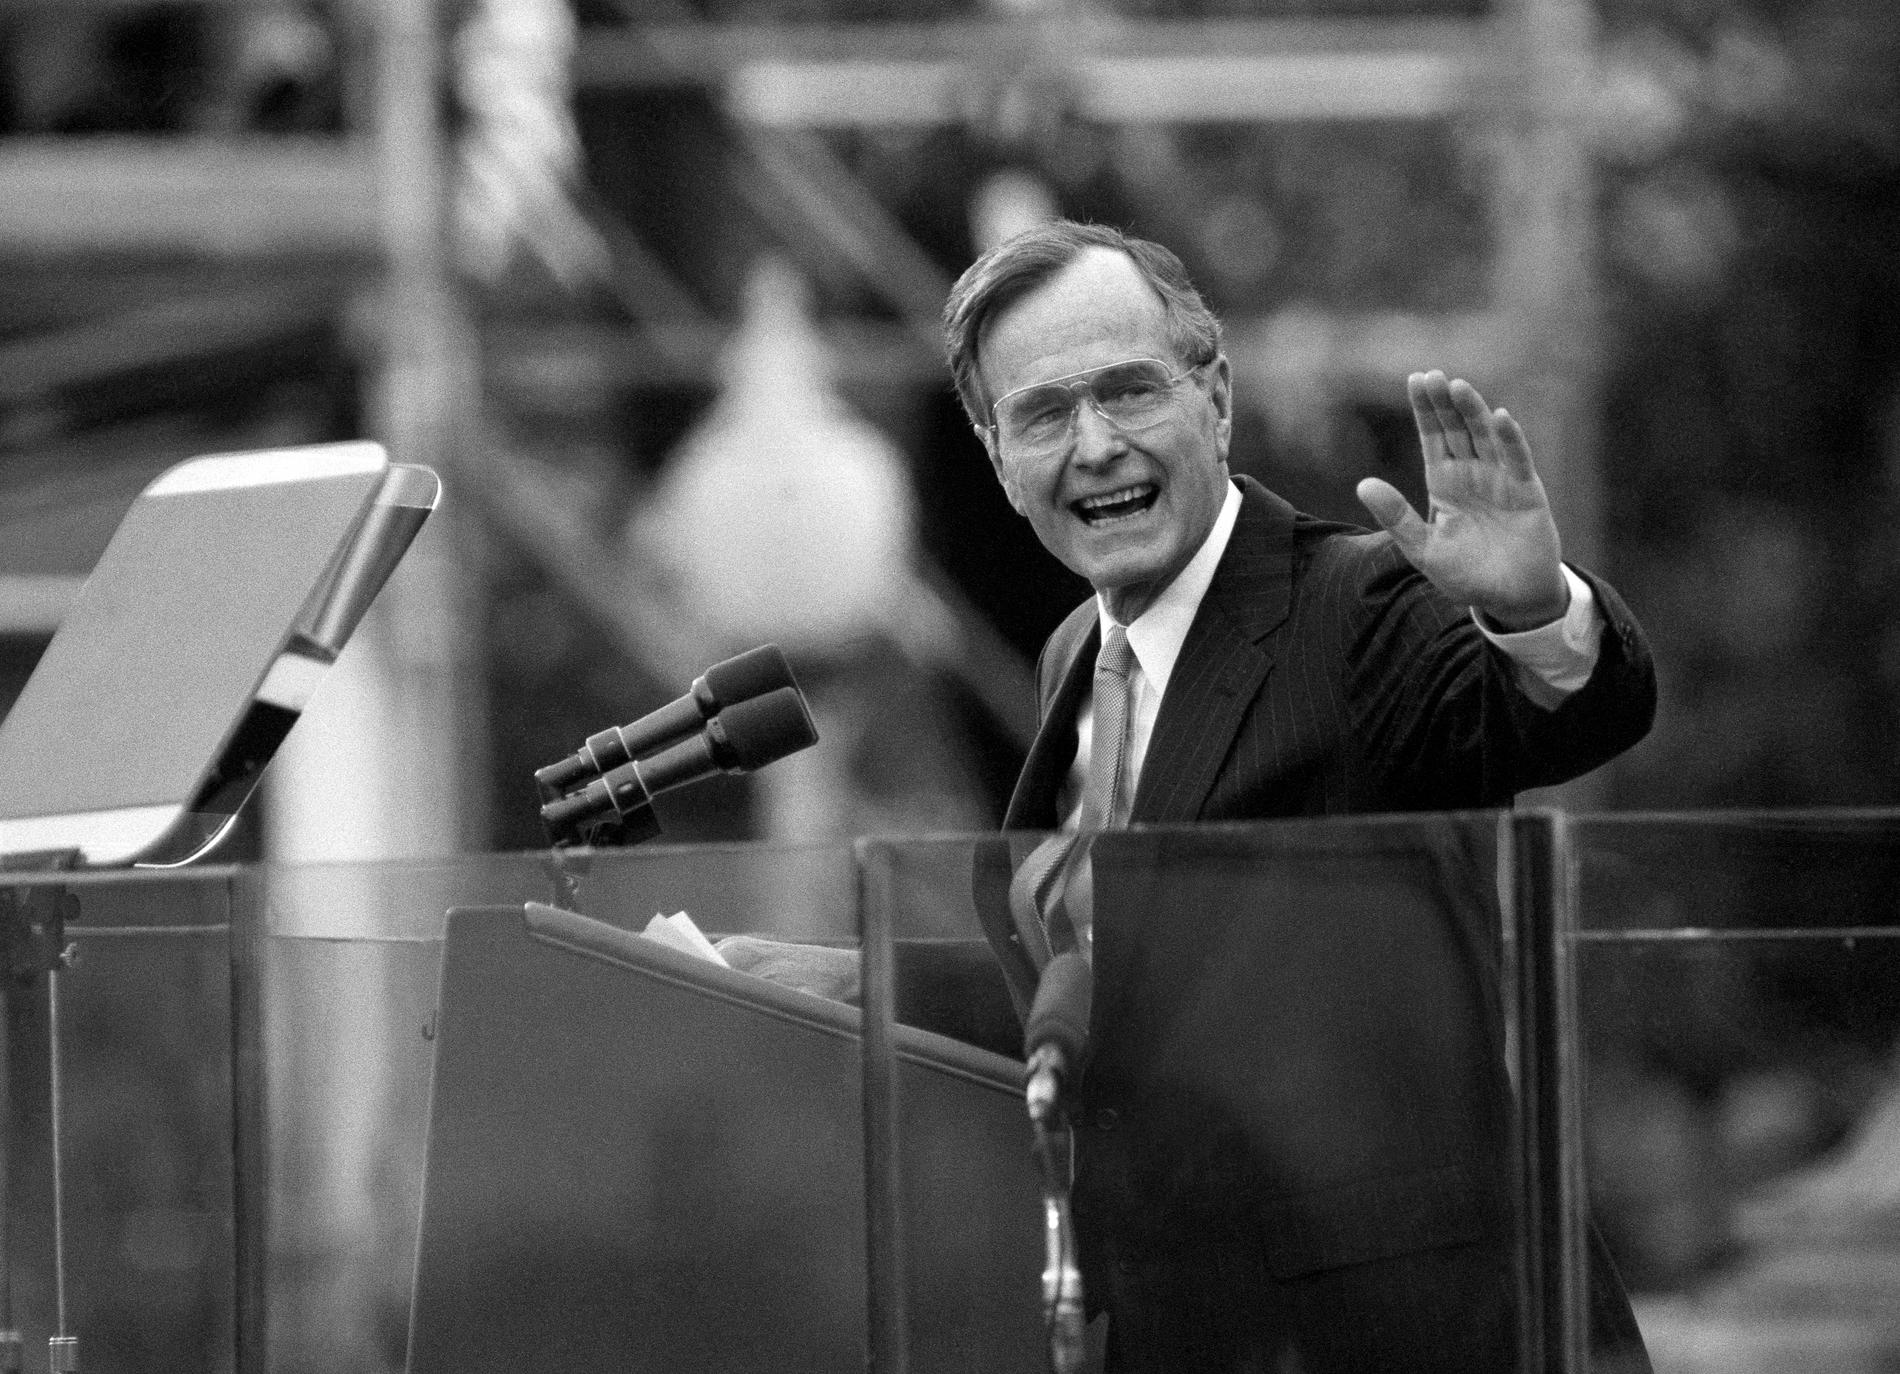 President George H. W. Bush during his inauguration, Jan. 20, 1989, in Washington. Bush, the 41st president of the United States and the father of the 43rd, who steered the nation through a tumultuous period in world affairs but was denied a second term after support for his presidency collapsed under the weight of an economic downturn and his seeming inattention to domestic affairs, died on Friday, Nov 30, 2018.